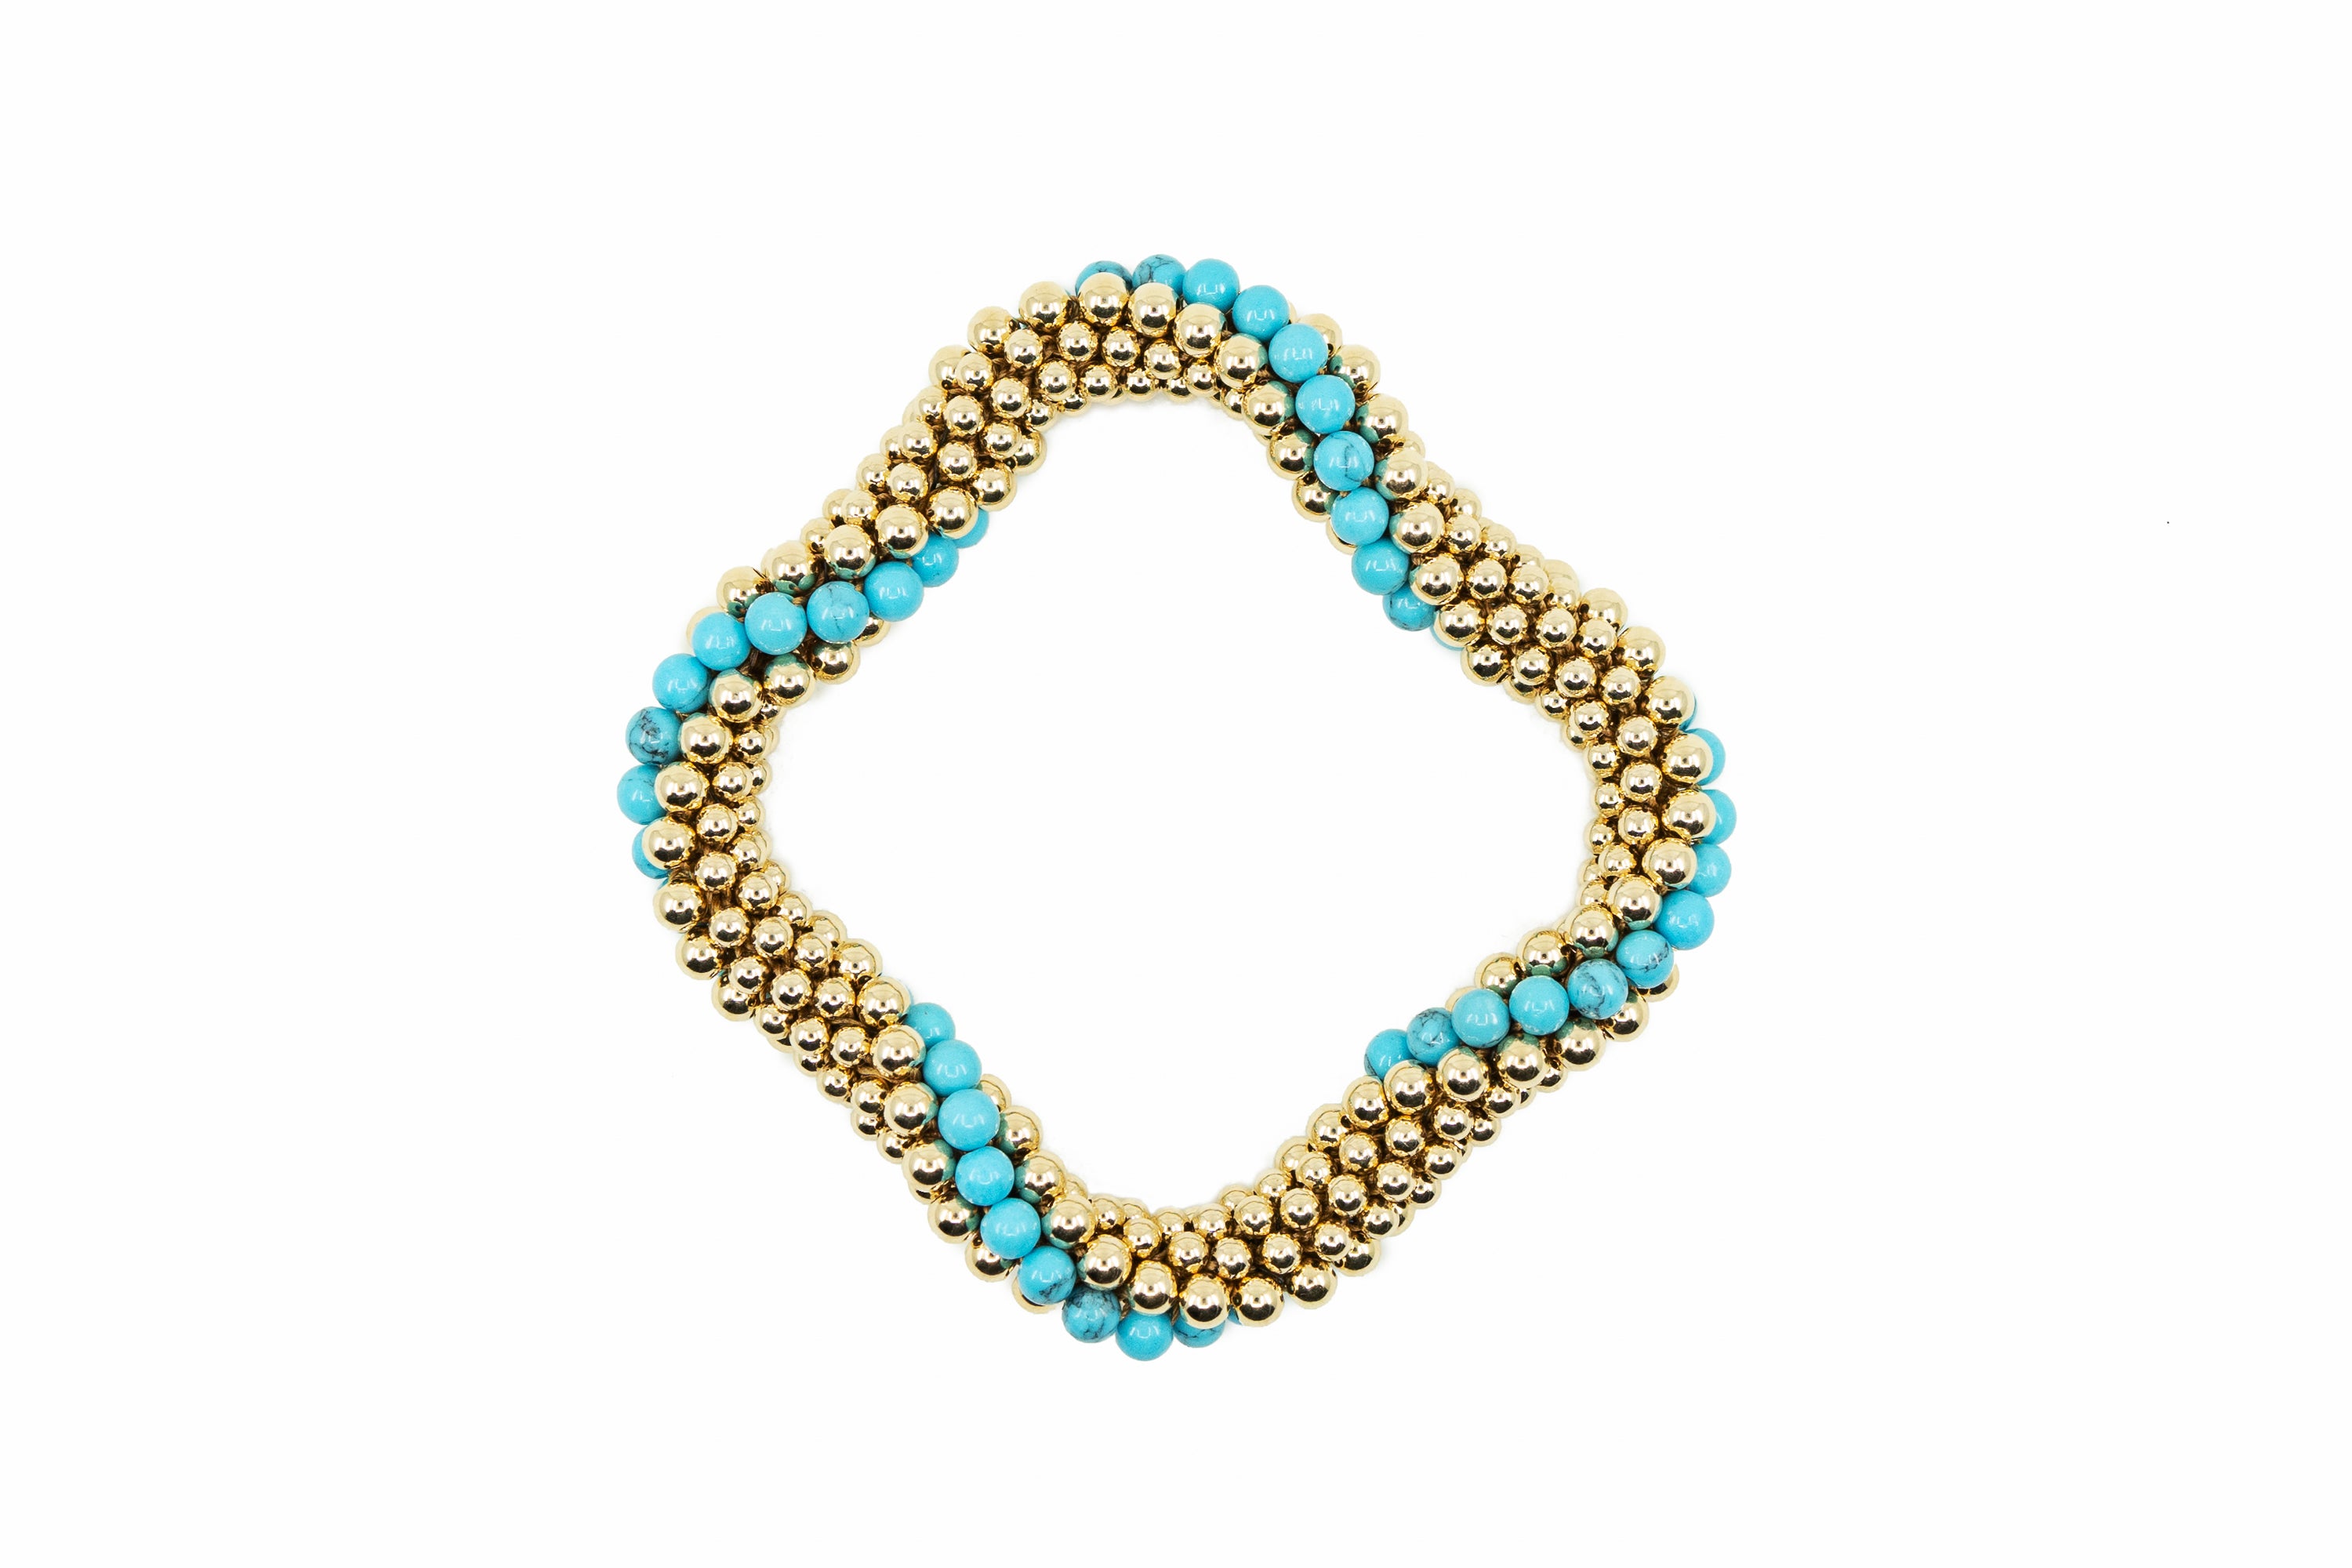 Scallop and Turquoise Cluster Bracelet